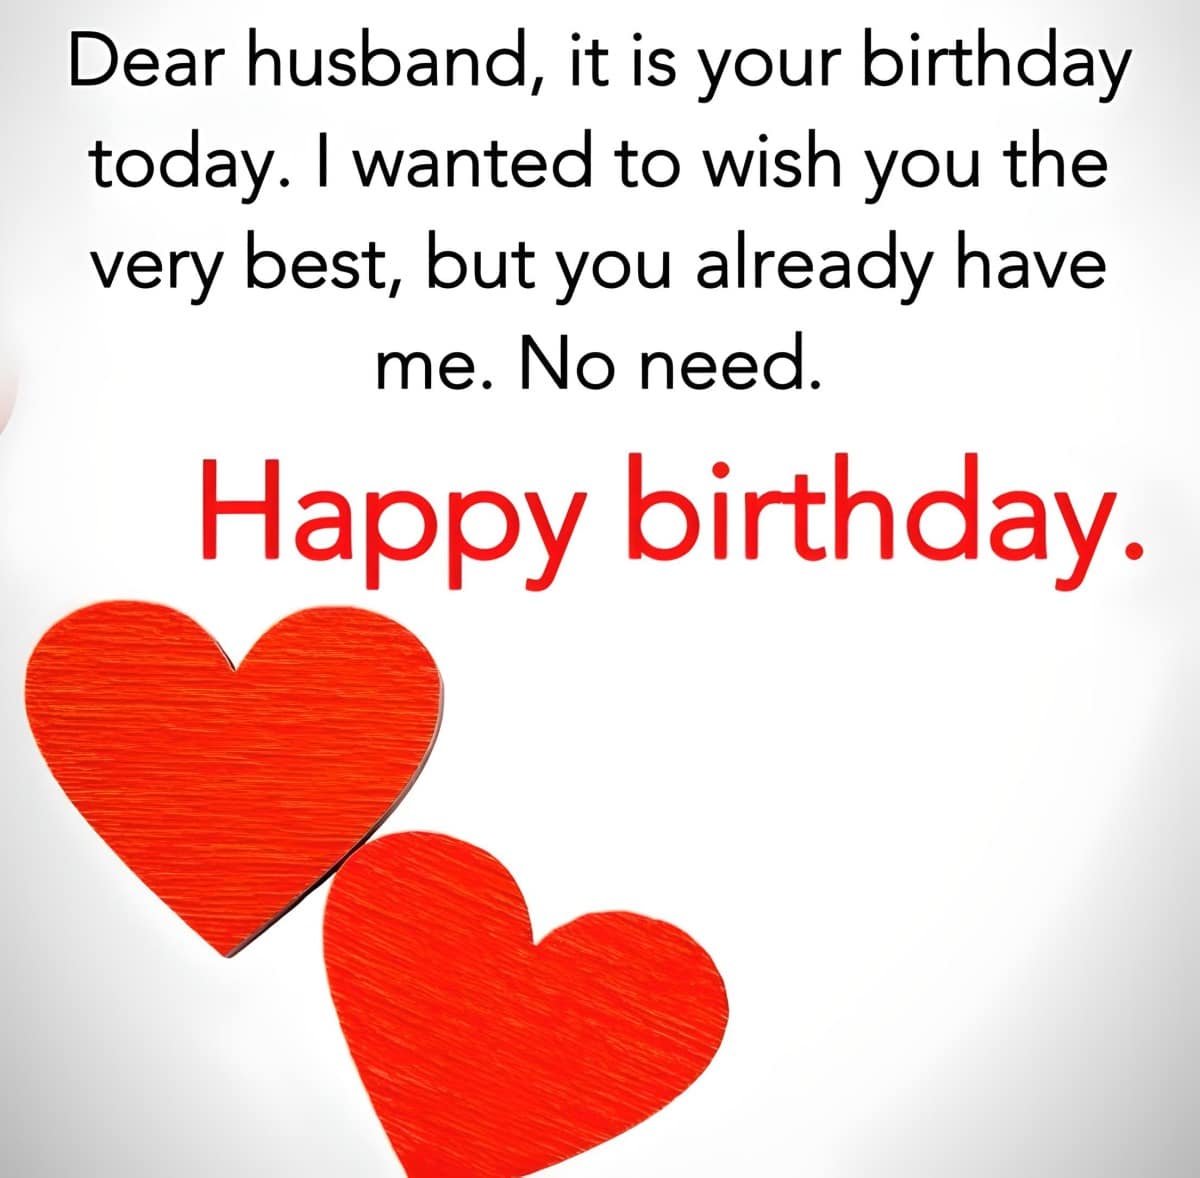 Happy Birthday Messages and Wishes for Husbands